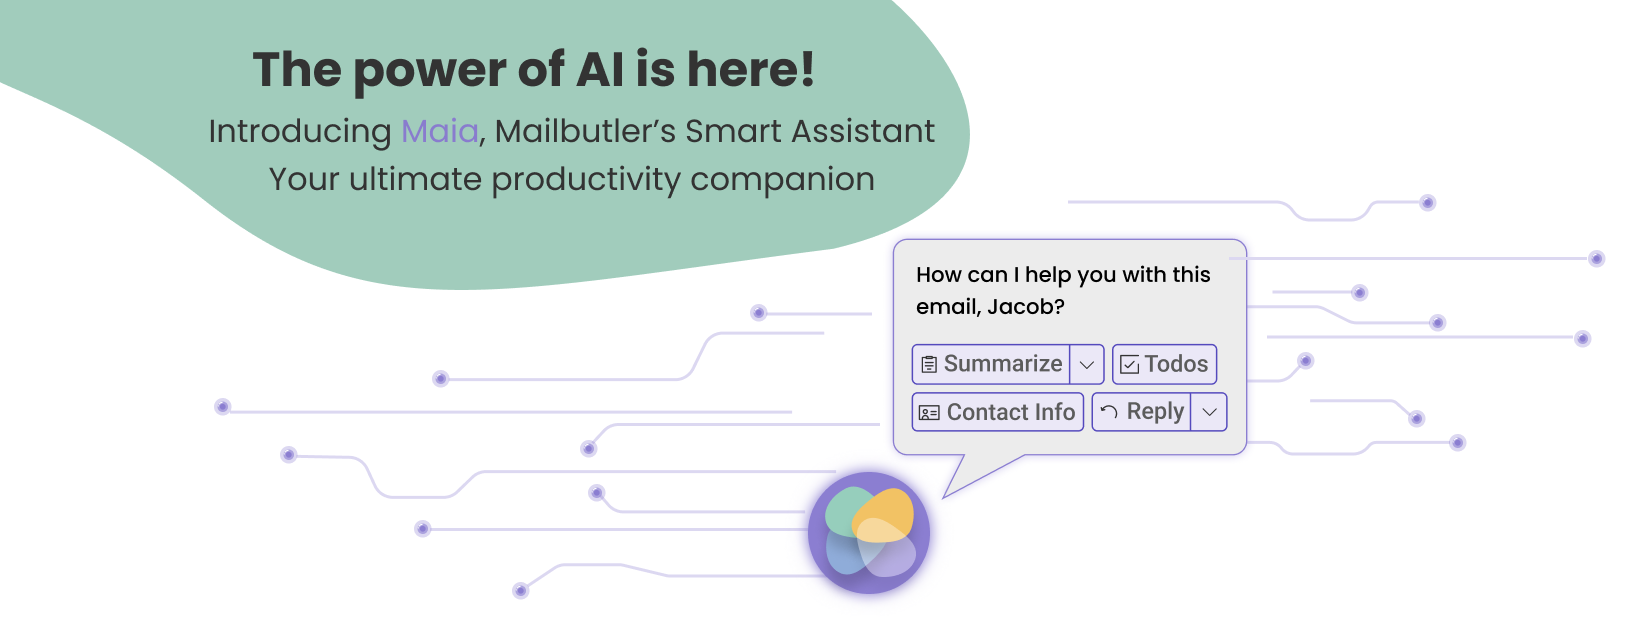 A graphic introducing Maia, the Mailbutler Smart Assistant